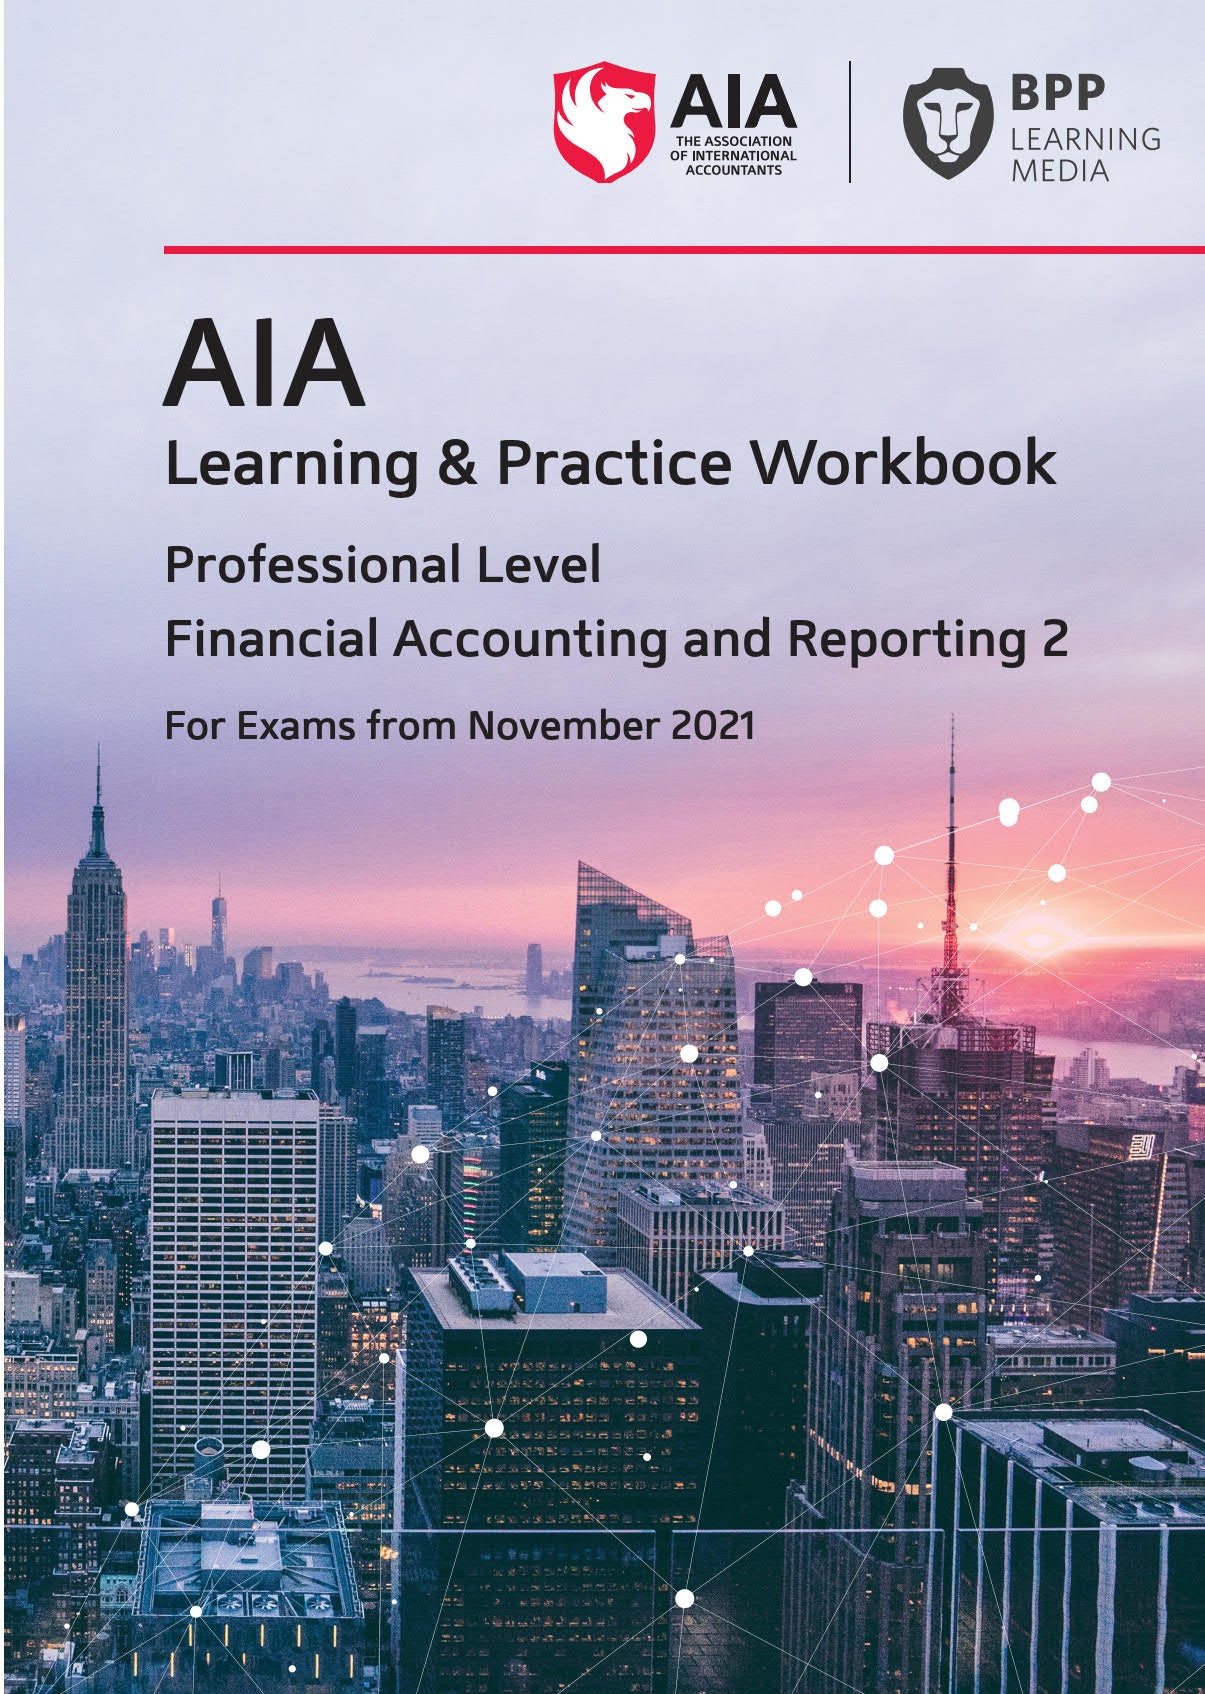 Financial Accounting and Reporting 2